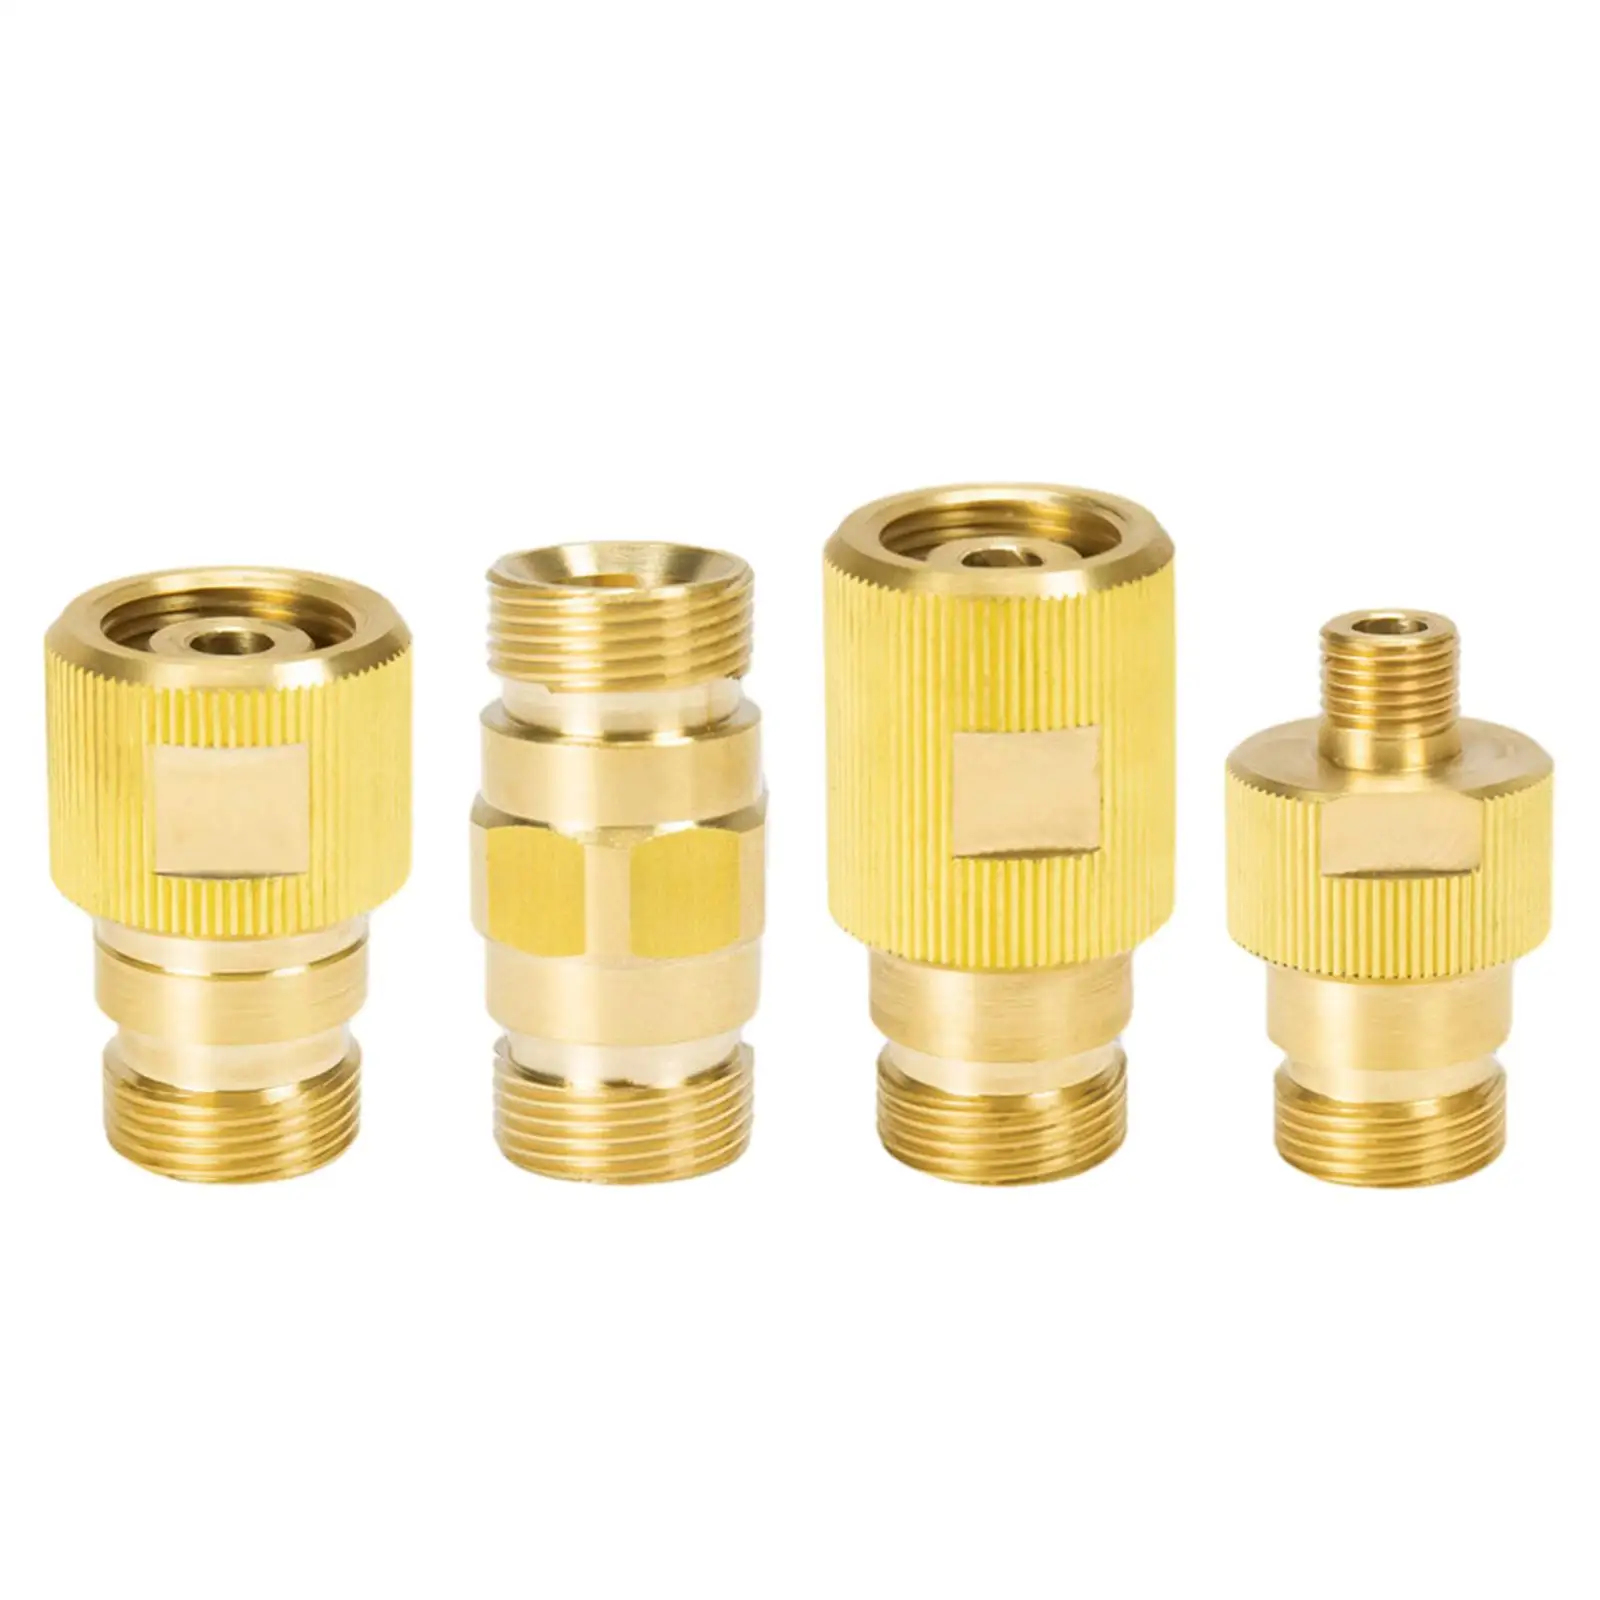 

Pressure Washer Nozzle Coupler Power Tools Accessories 1/4 inch Connect Fittings Hose Adapter for Irrigate Cleaning Accessory